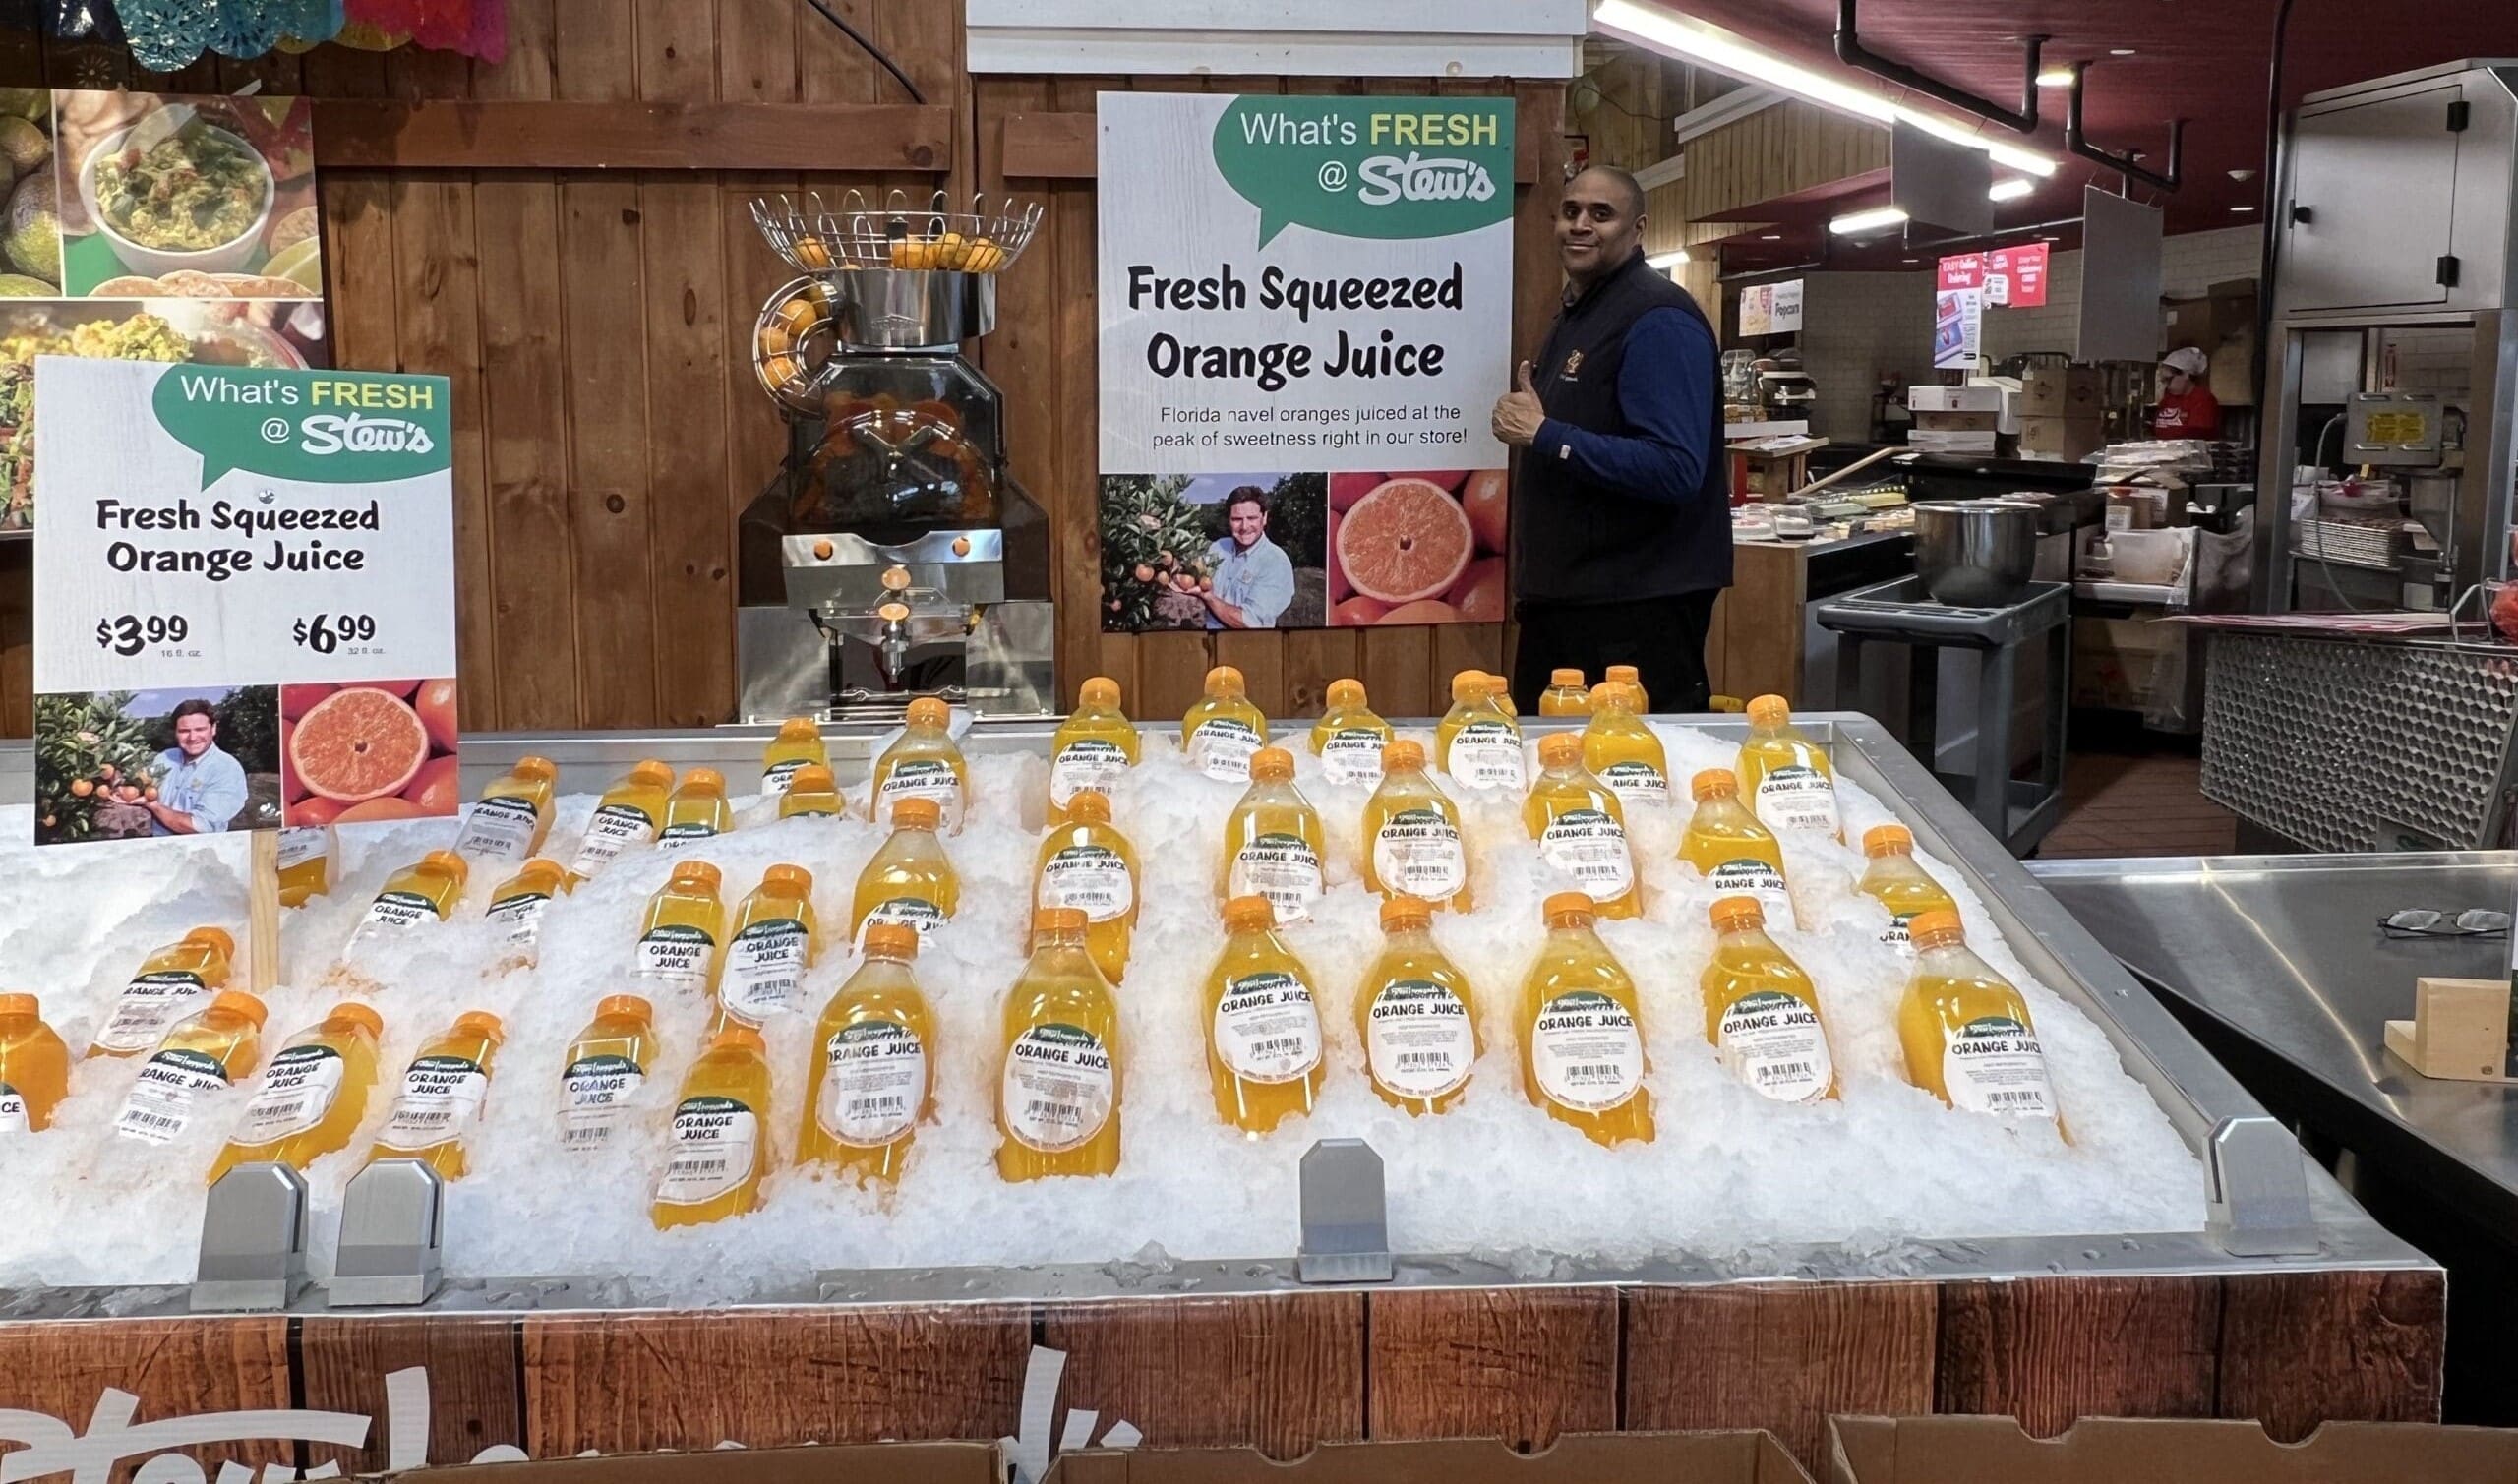 A man stands smiling near a display of fresh-squeezed orange juice bottles sitting on ice at a market. Signs above the citrus-themed display advertise the fresh orange juice for $3.99. The market area is surrounded by wooden decor and food preparation equipment, including a commercial juicer in the corner.